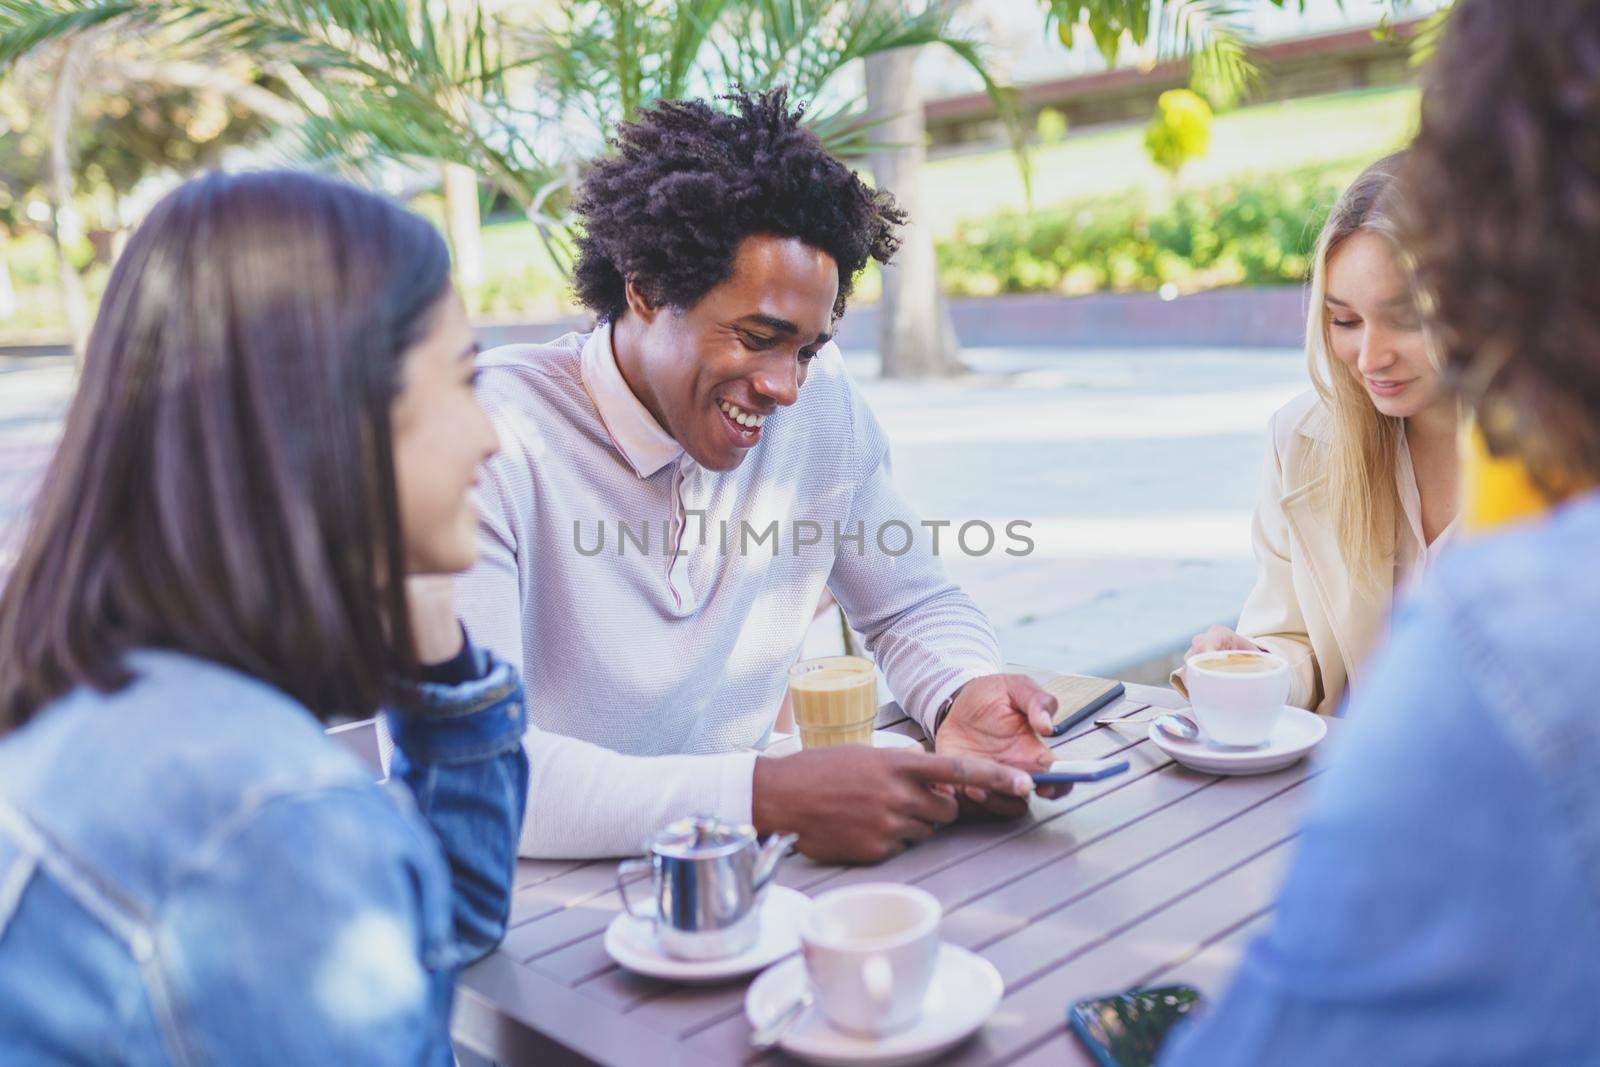 Multi-ethnic group of friends having a drink together in an outdoor bar. One of the men shows something on his smartphone to his friends.